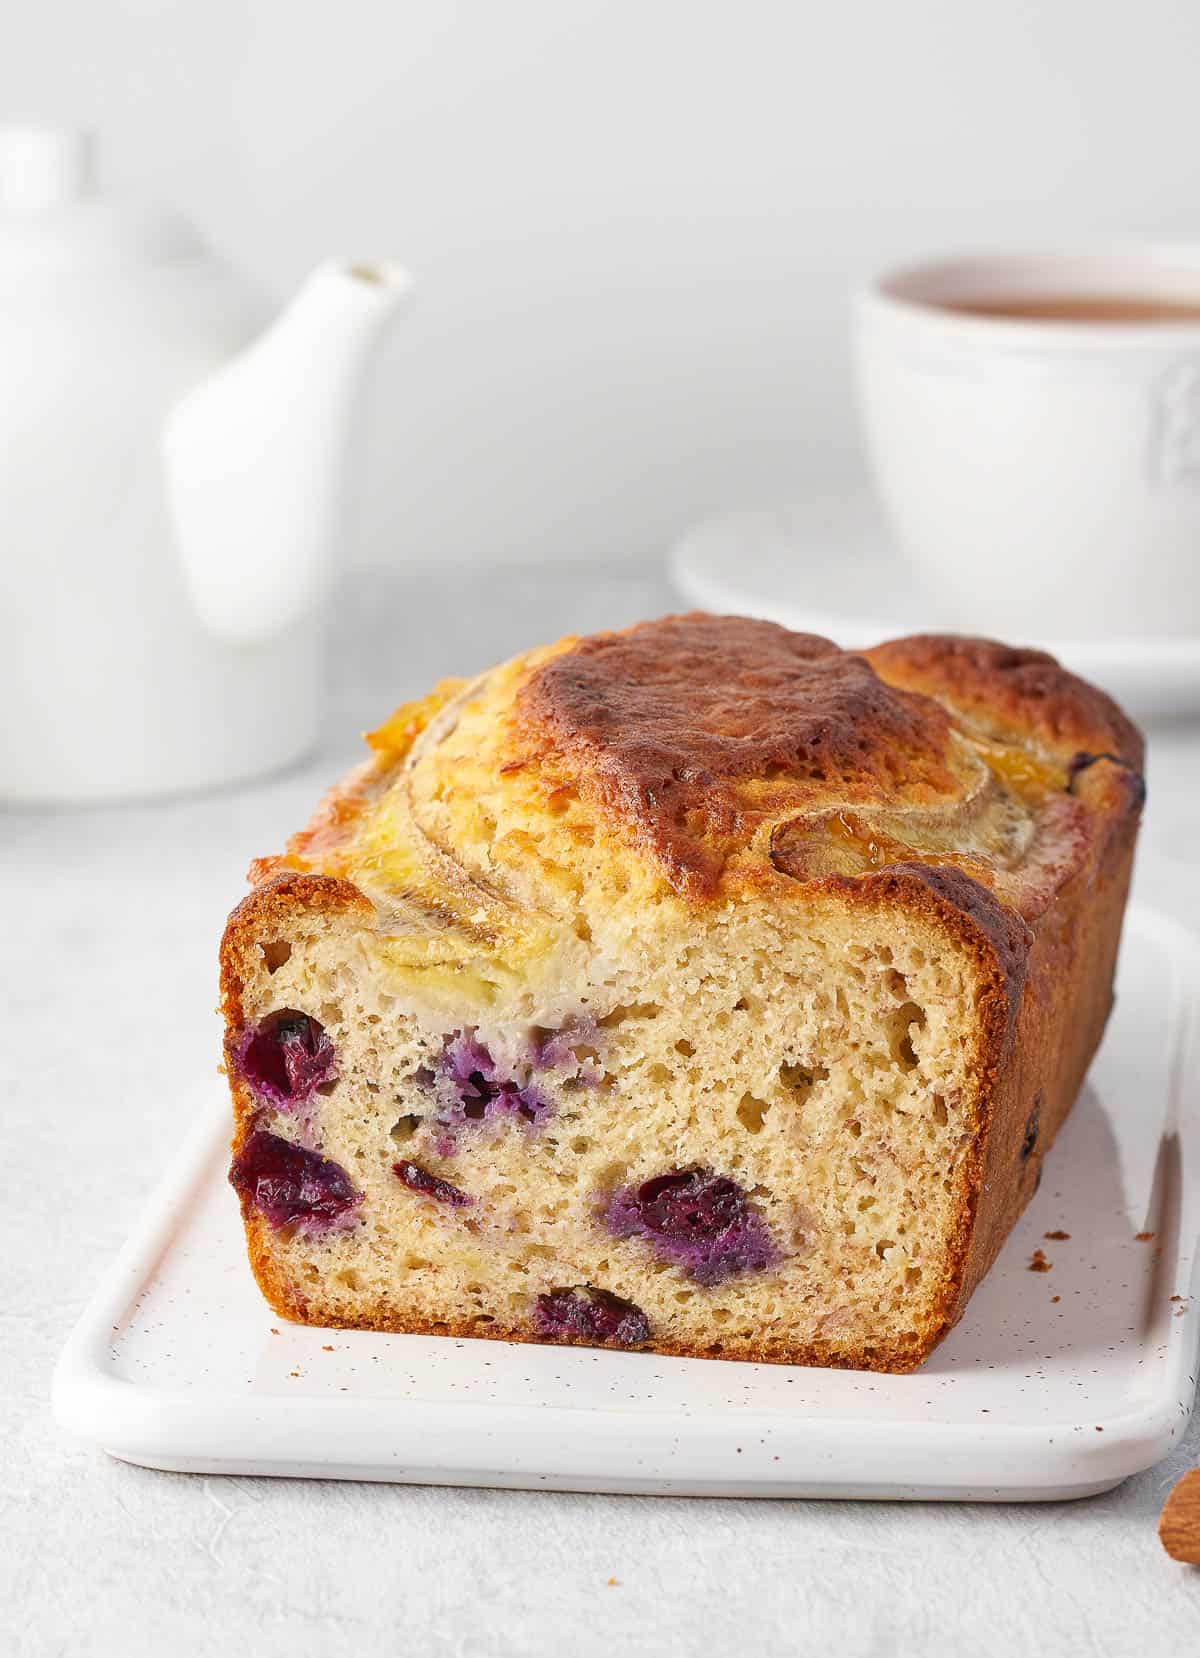 A white ceramic plate with a loaf of homemade banana bread with blueberries. There is a teapot and a mug of tea in the background.